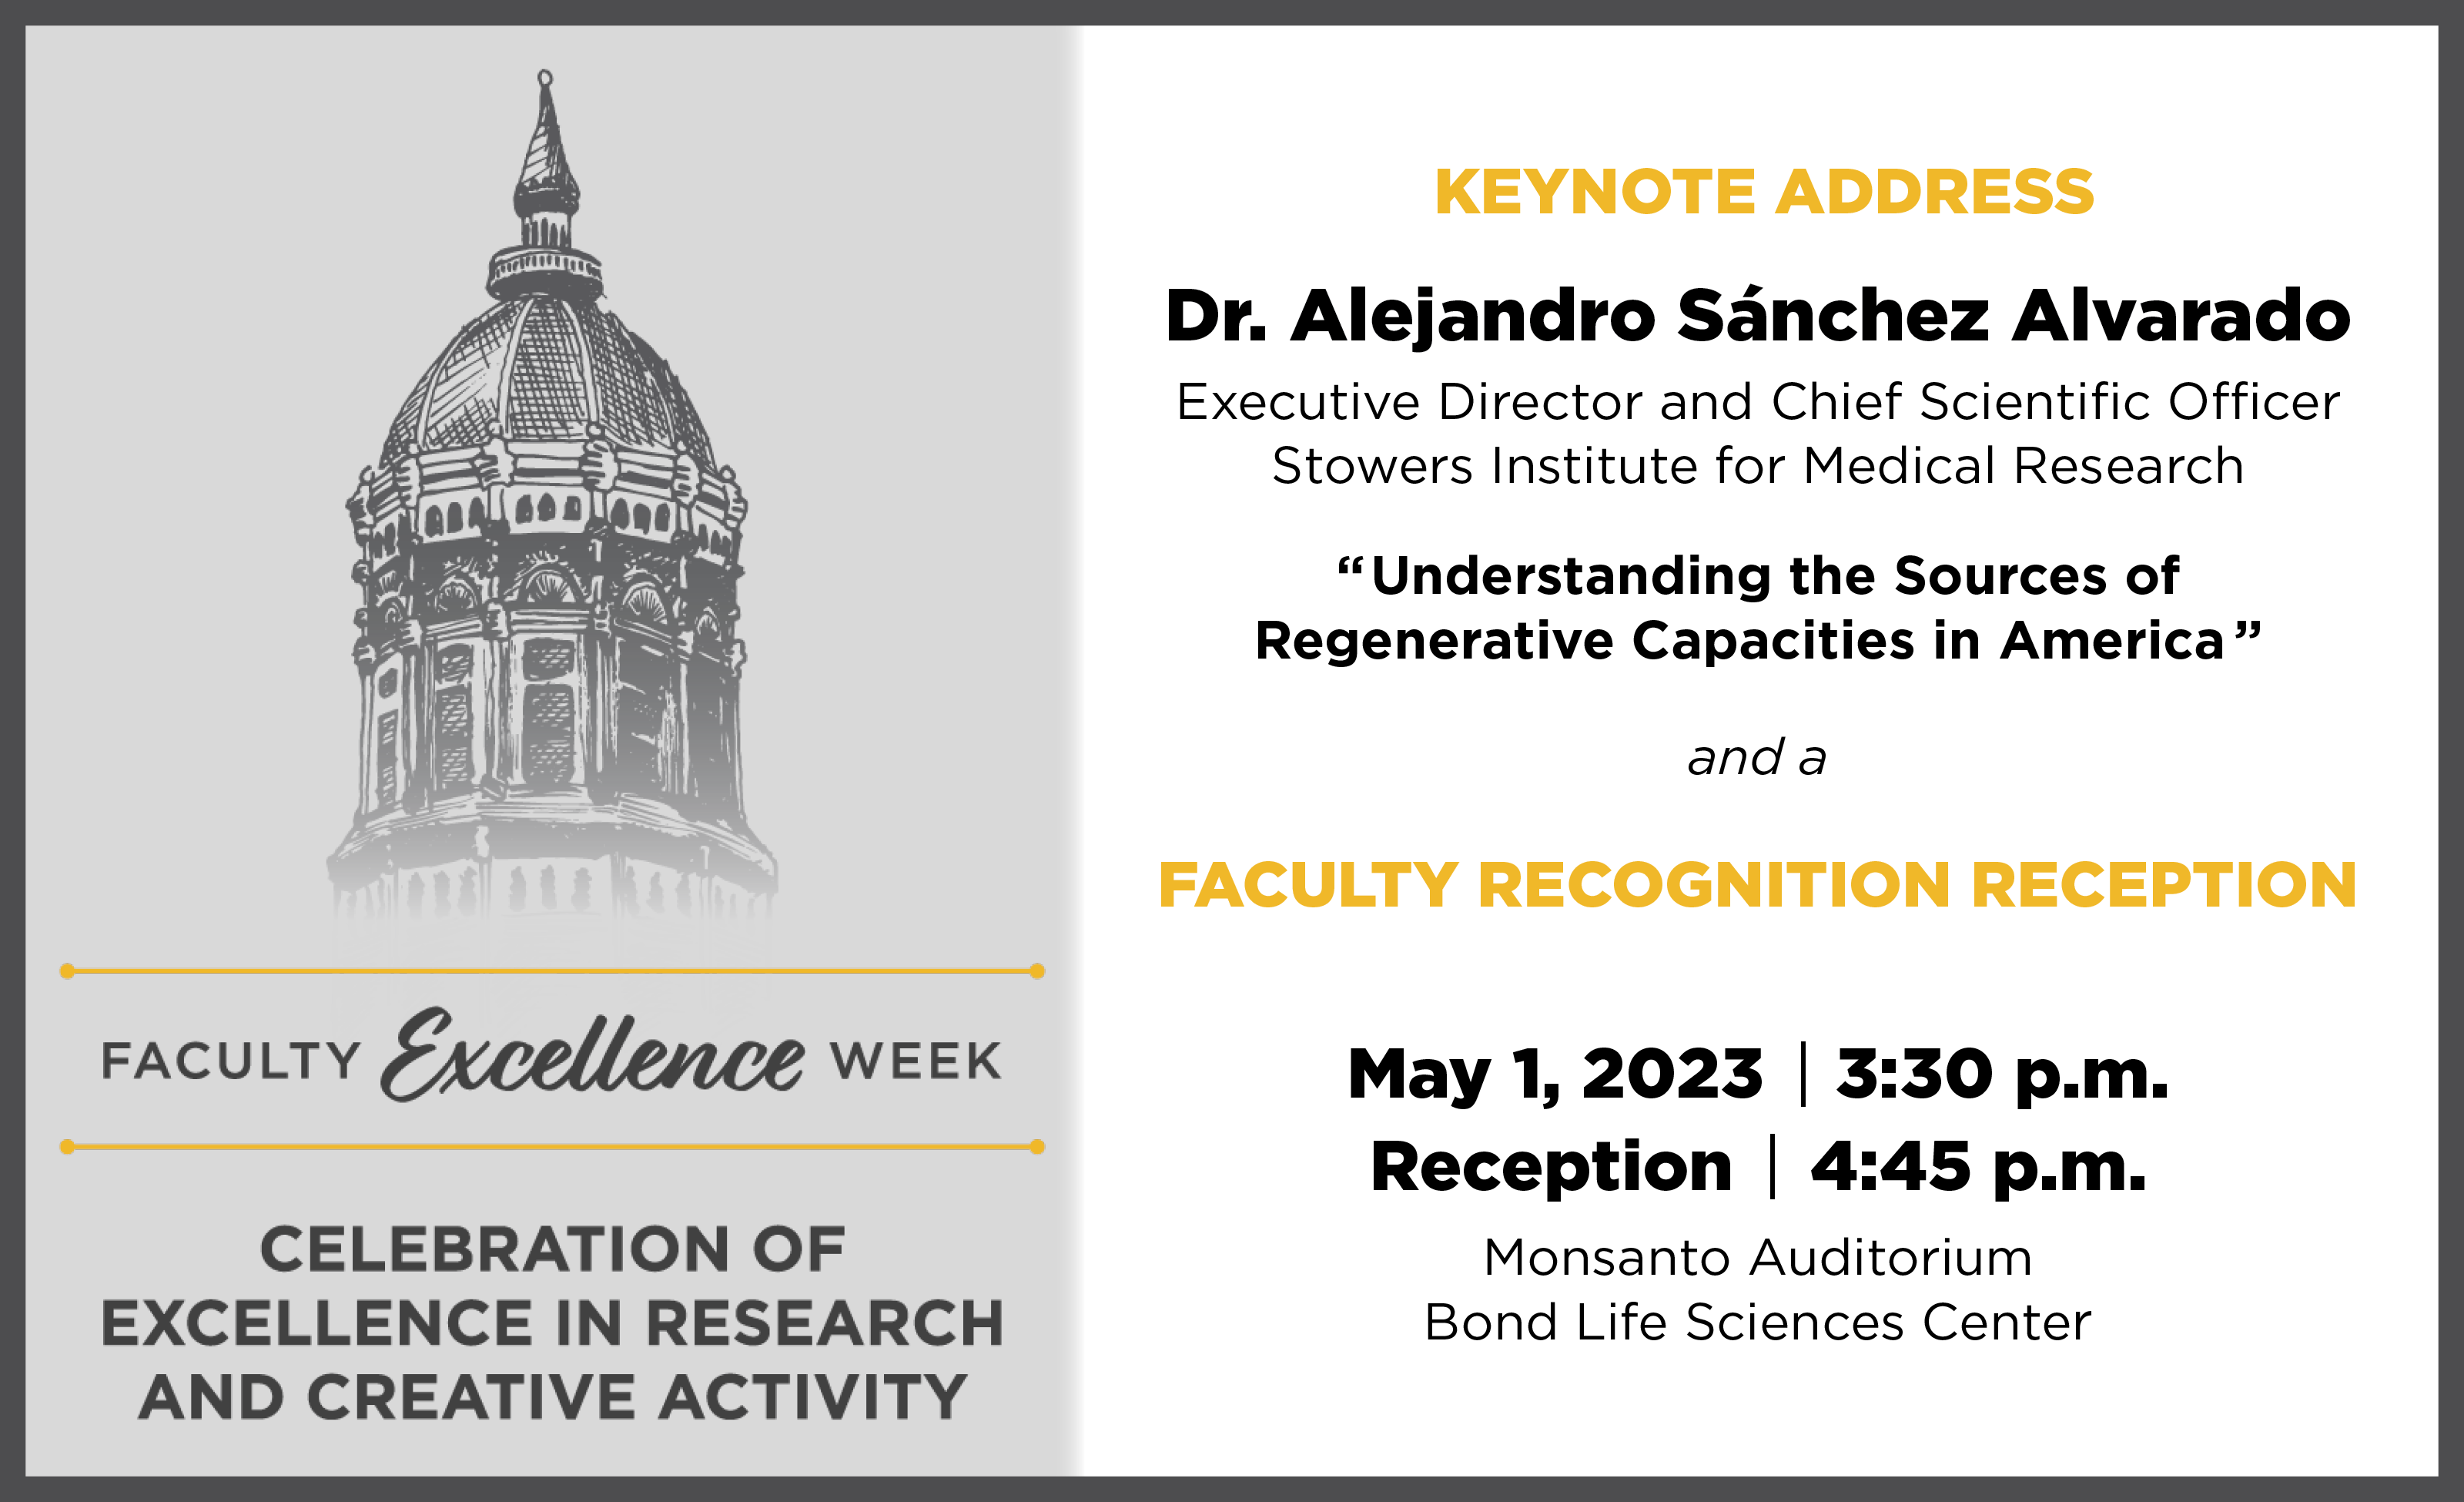 Faculty Excellence Week Celebration of Excellence in Research and Creative Achievement with Dr. Alejandro Sanchez Alvarado as keynote speaker and a faculty recognition reception, May 1, 3:30 p.m., Monsanto Auditorium, Bond Life Science Center